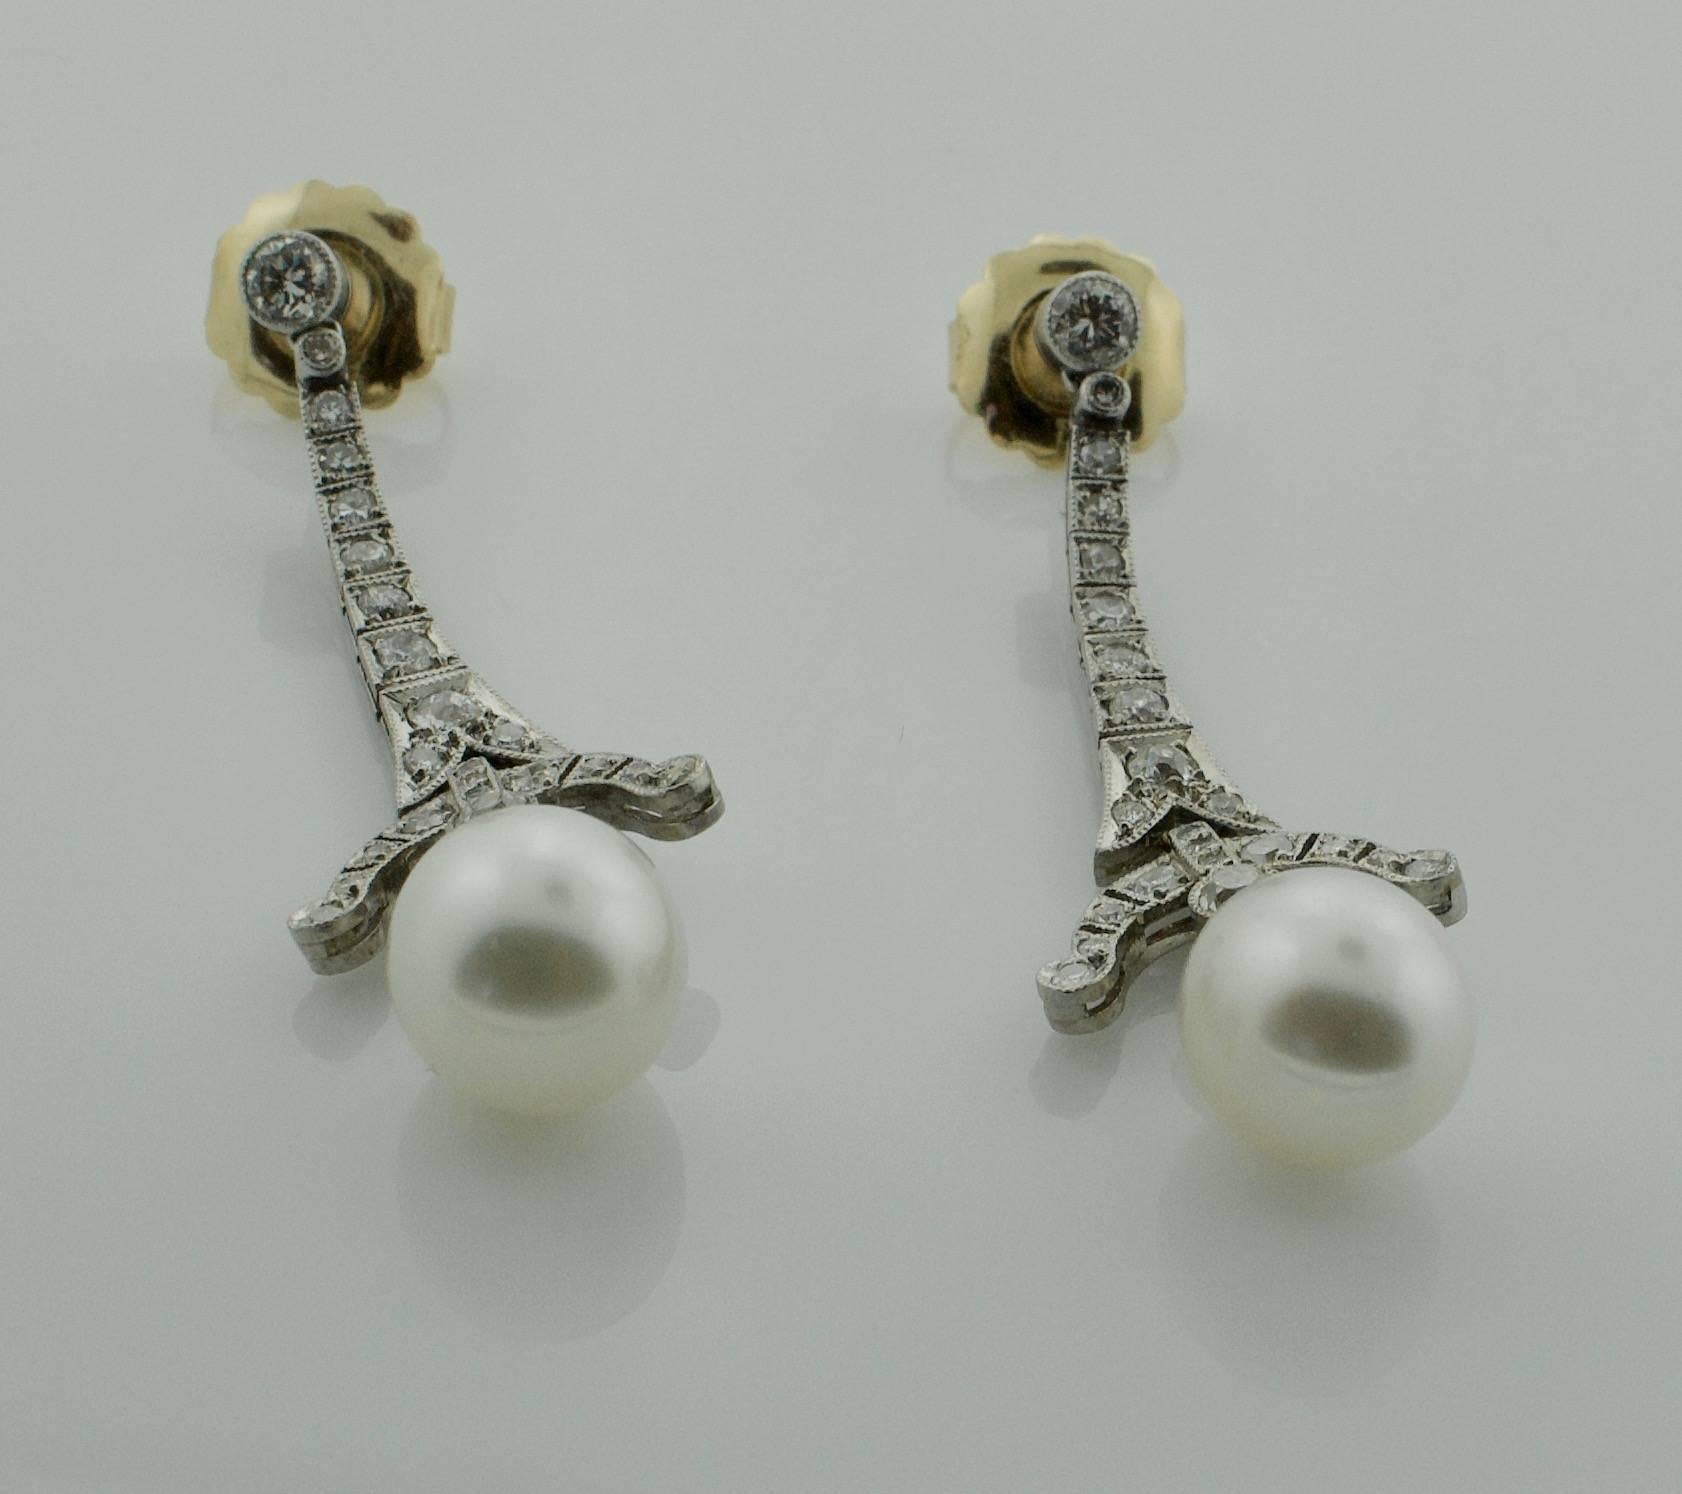 Art Deco Platinum and Pearl Diamond Earrings
Two Cultured Pearls 9.8 - 9.7 mm
Forty Six Round and Old European Cut Diamonds weighing 1.50 carats approximately
Ideal for a Bride
Handmade, Fully Hinged and Articulated

